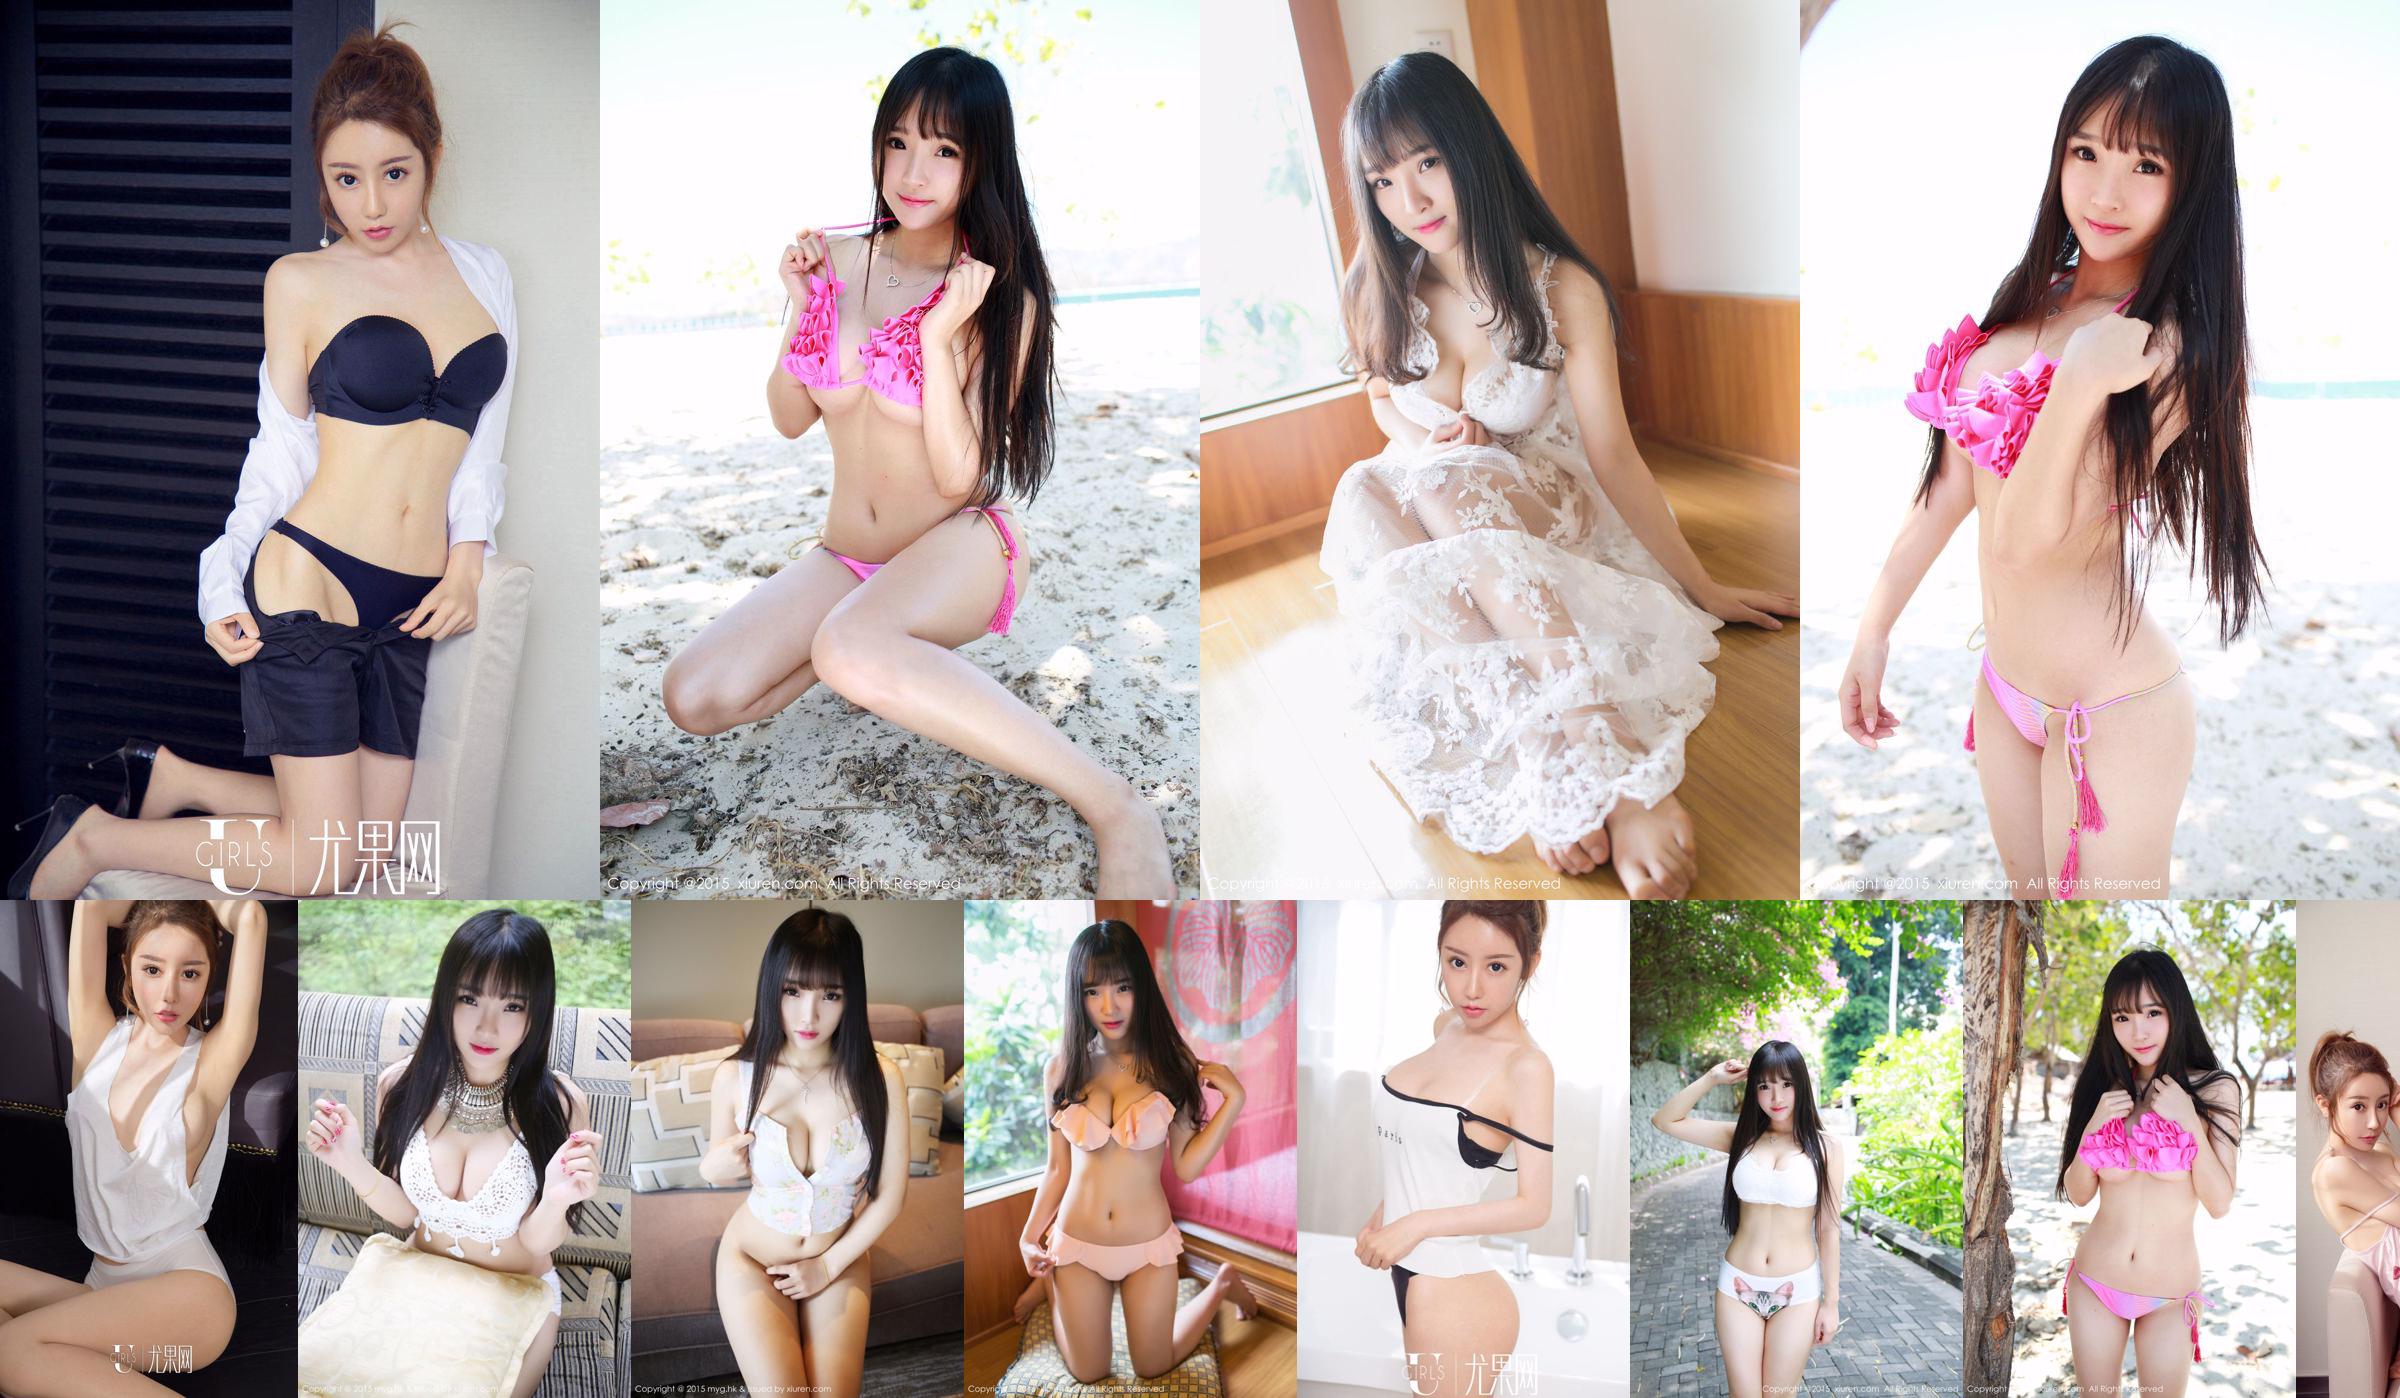 Xia Yao baby "Private Shooting of a Girl with Big Breasts" [MyGirl] Vol.118 No.076ab3 Page 9